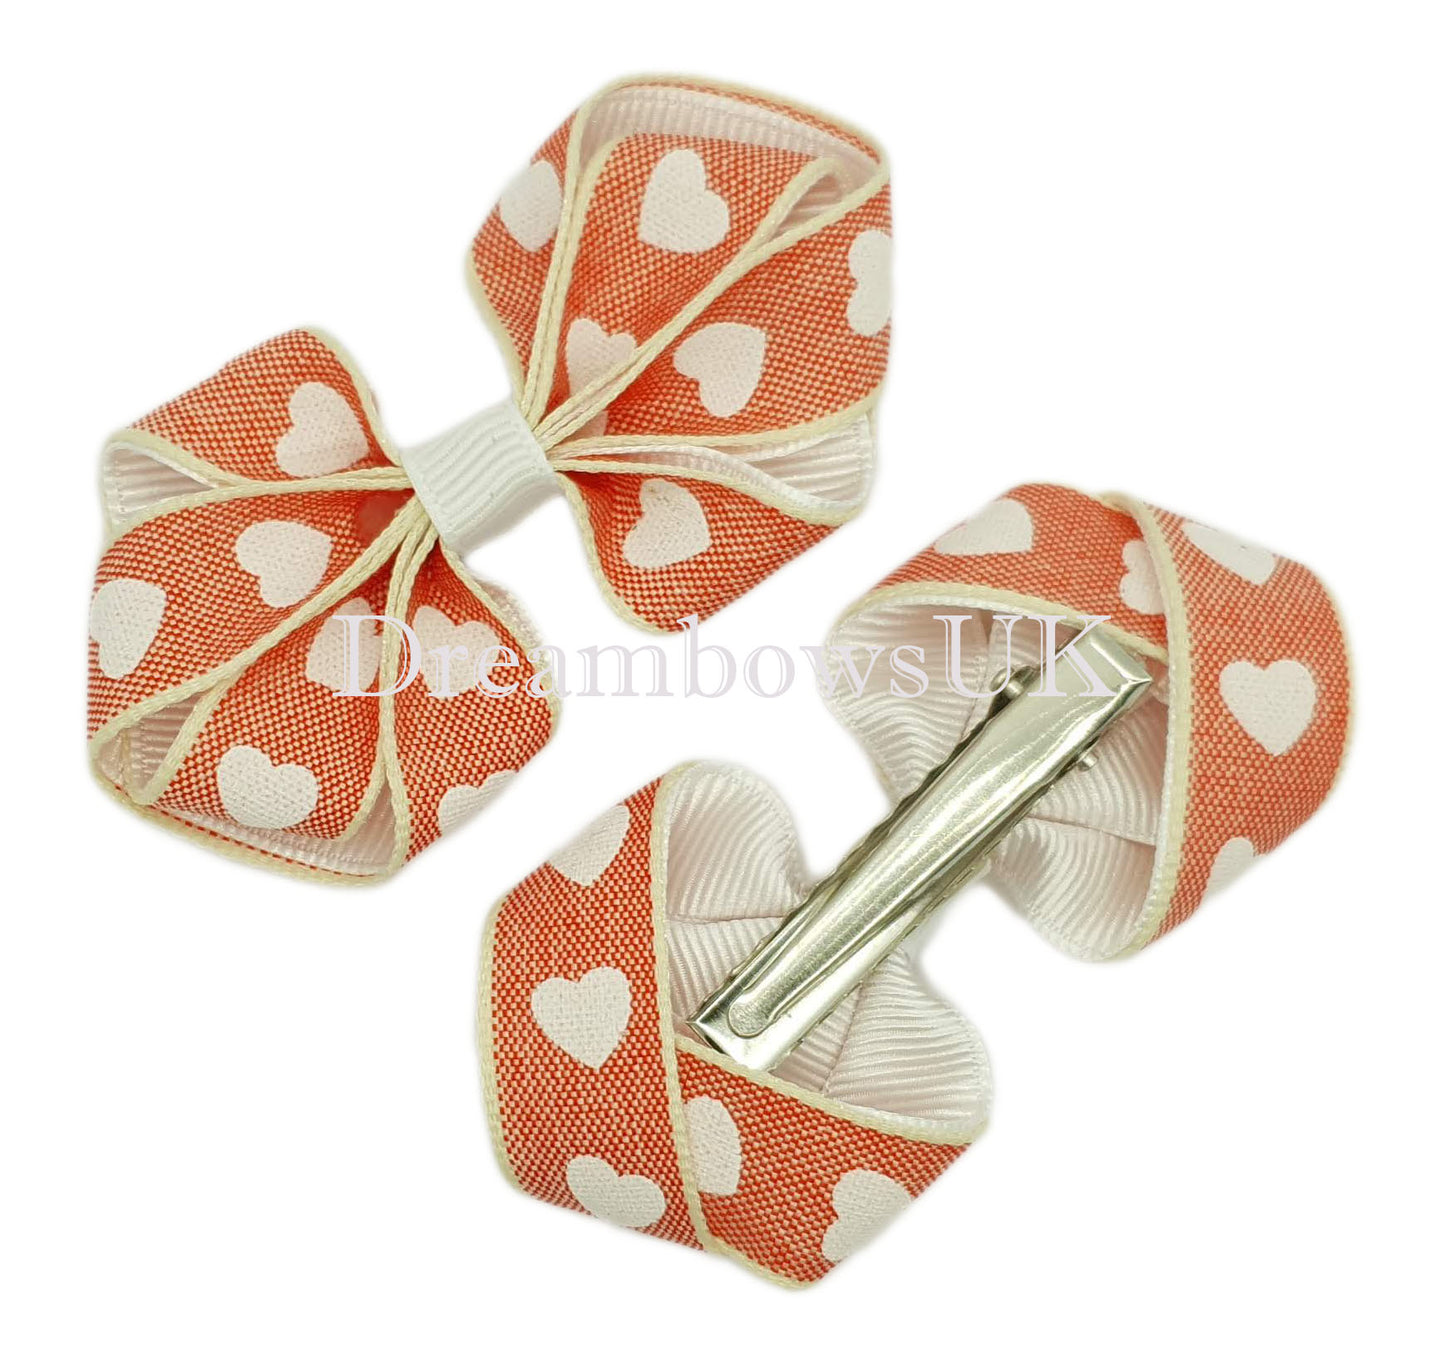 Red and white bows, crocodile clips